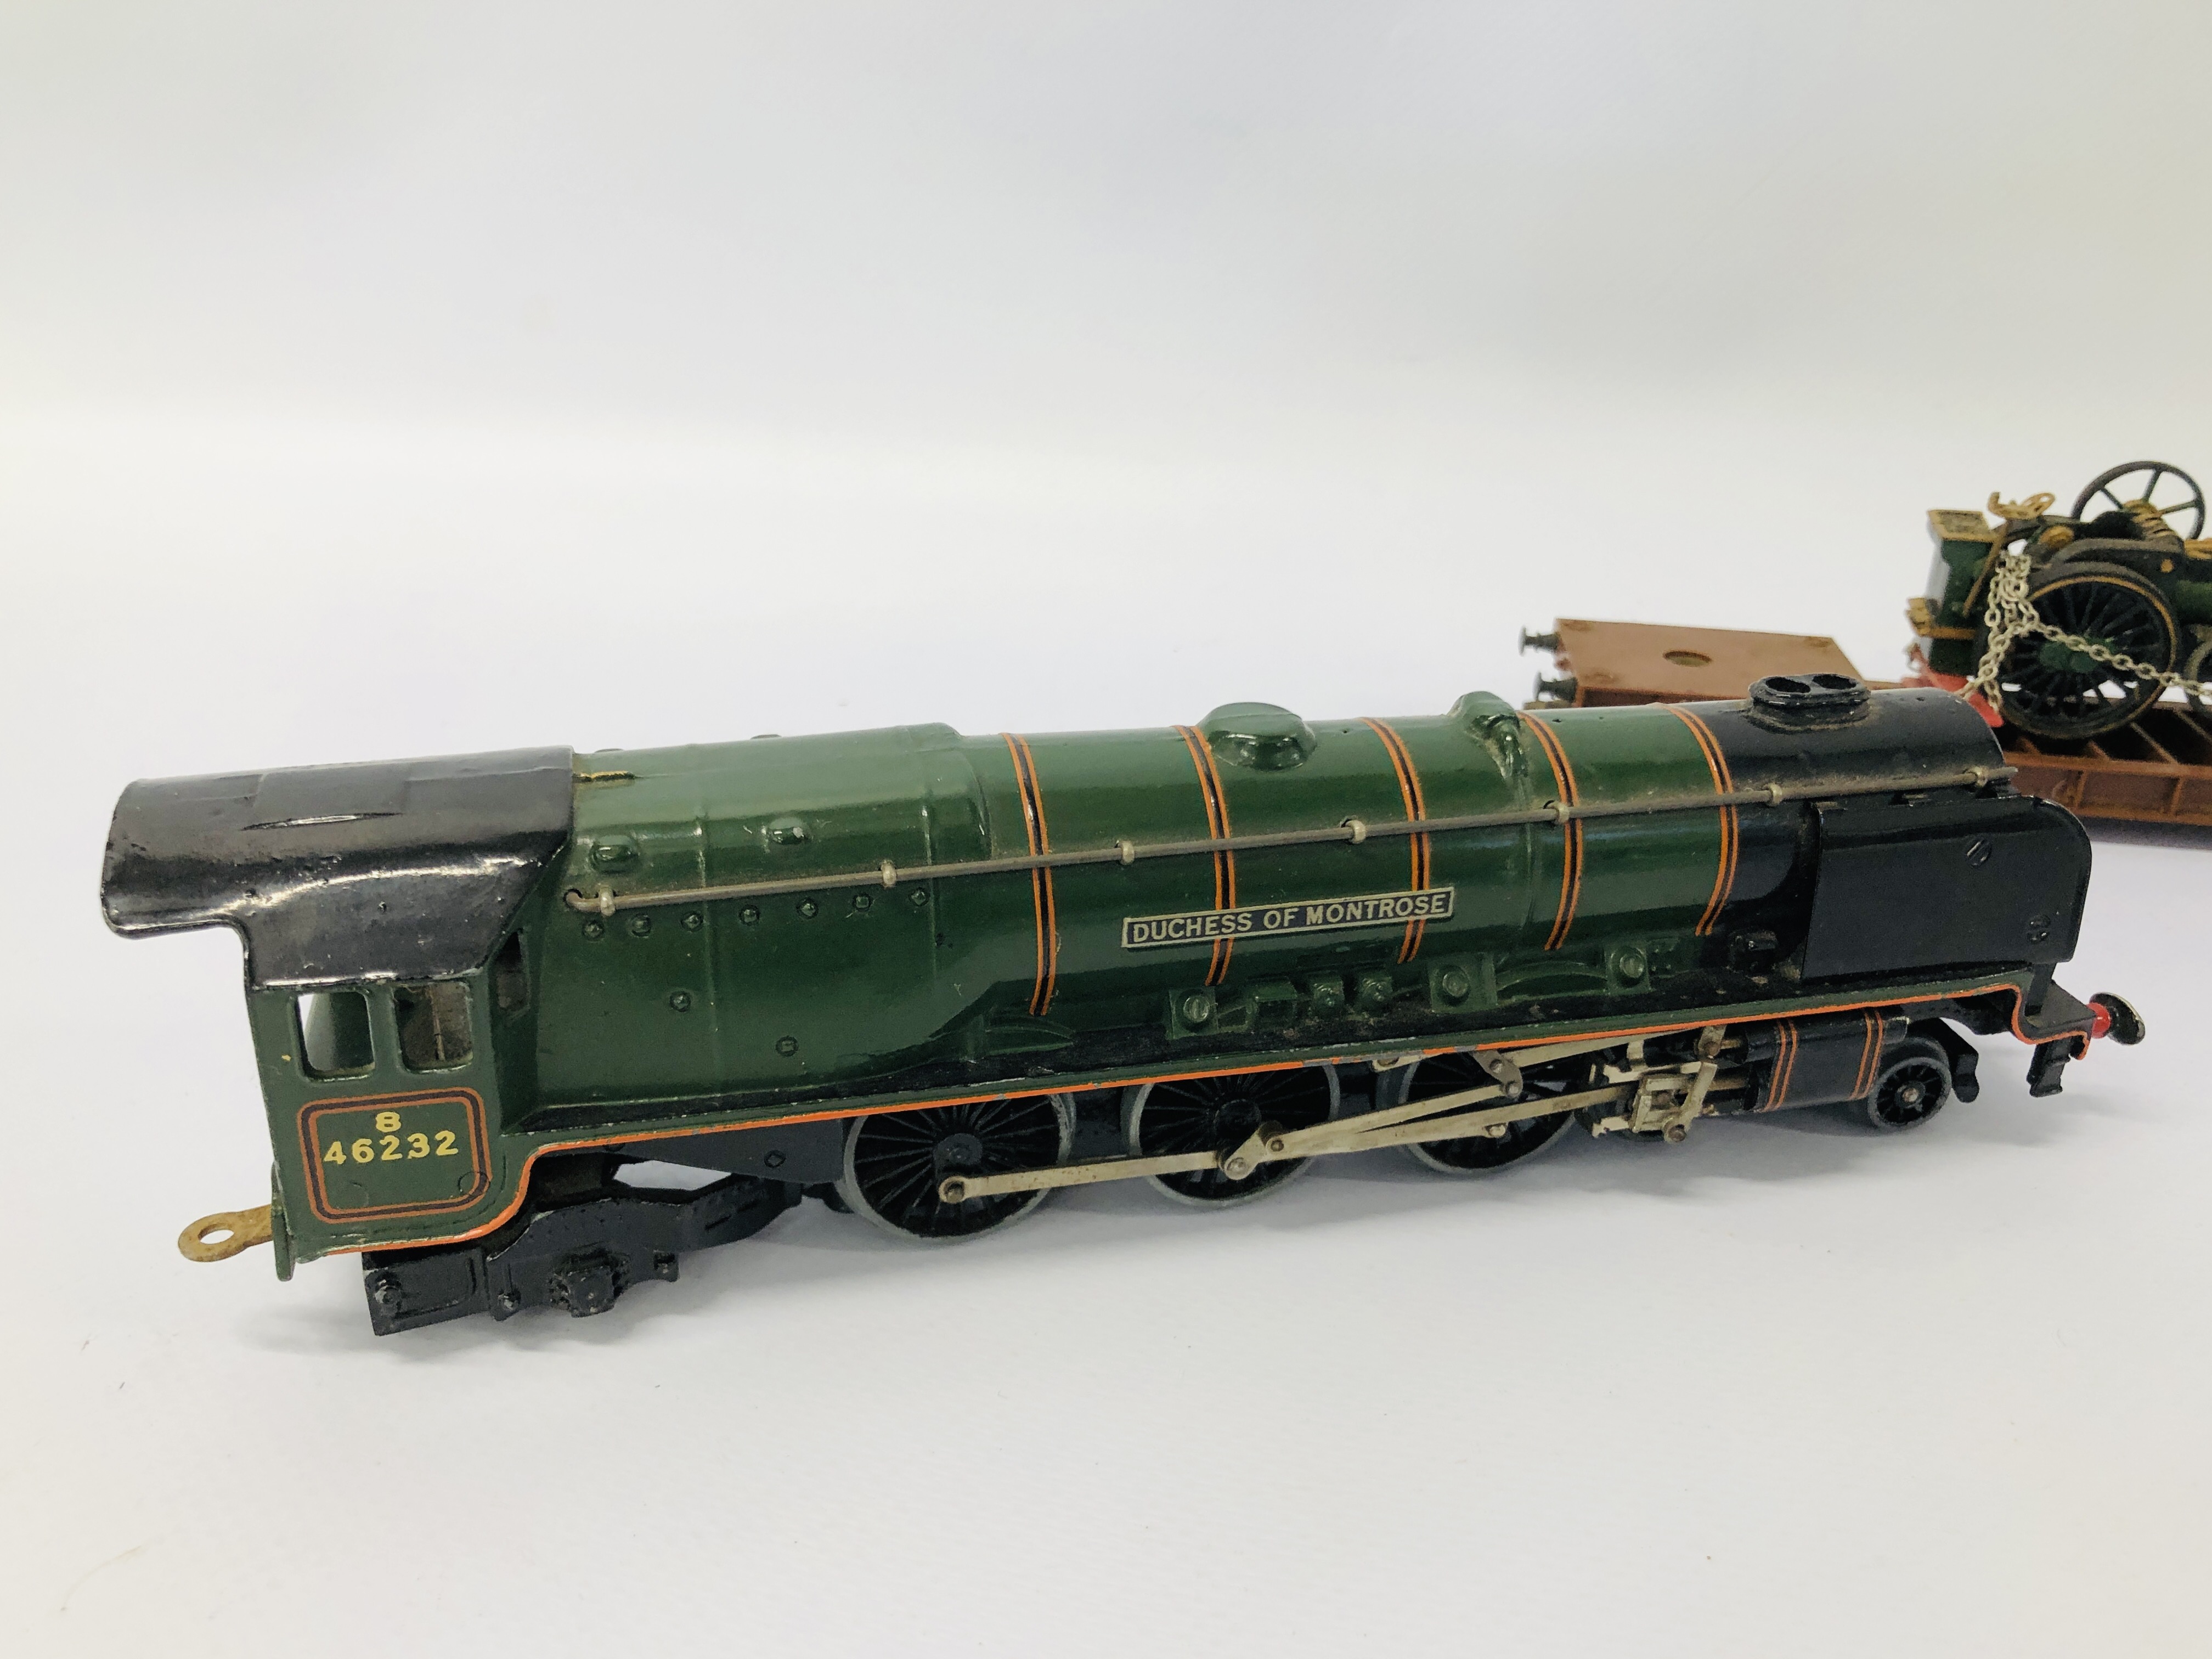 A HORNBY DUBO MECCANO 00 GAUGE DUCHESS OF MONTROSE LOCOMOTIVE & 3 TRIANG 00 GAUGE WAGONS WITH CARGO - Image 5 of 14